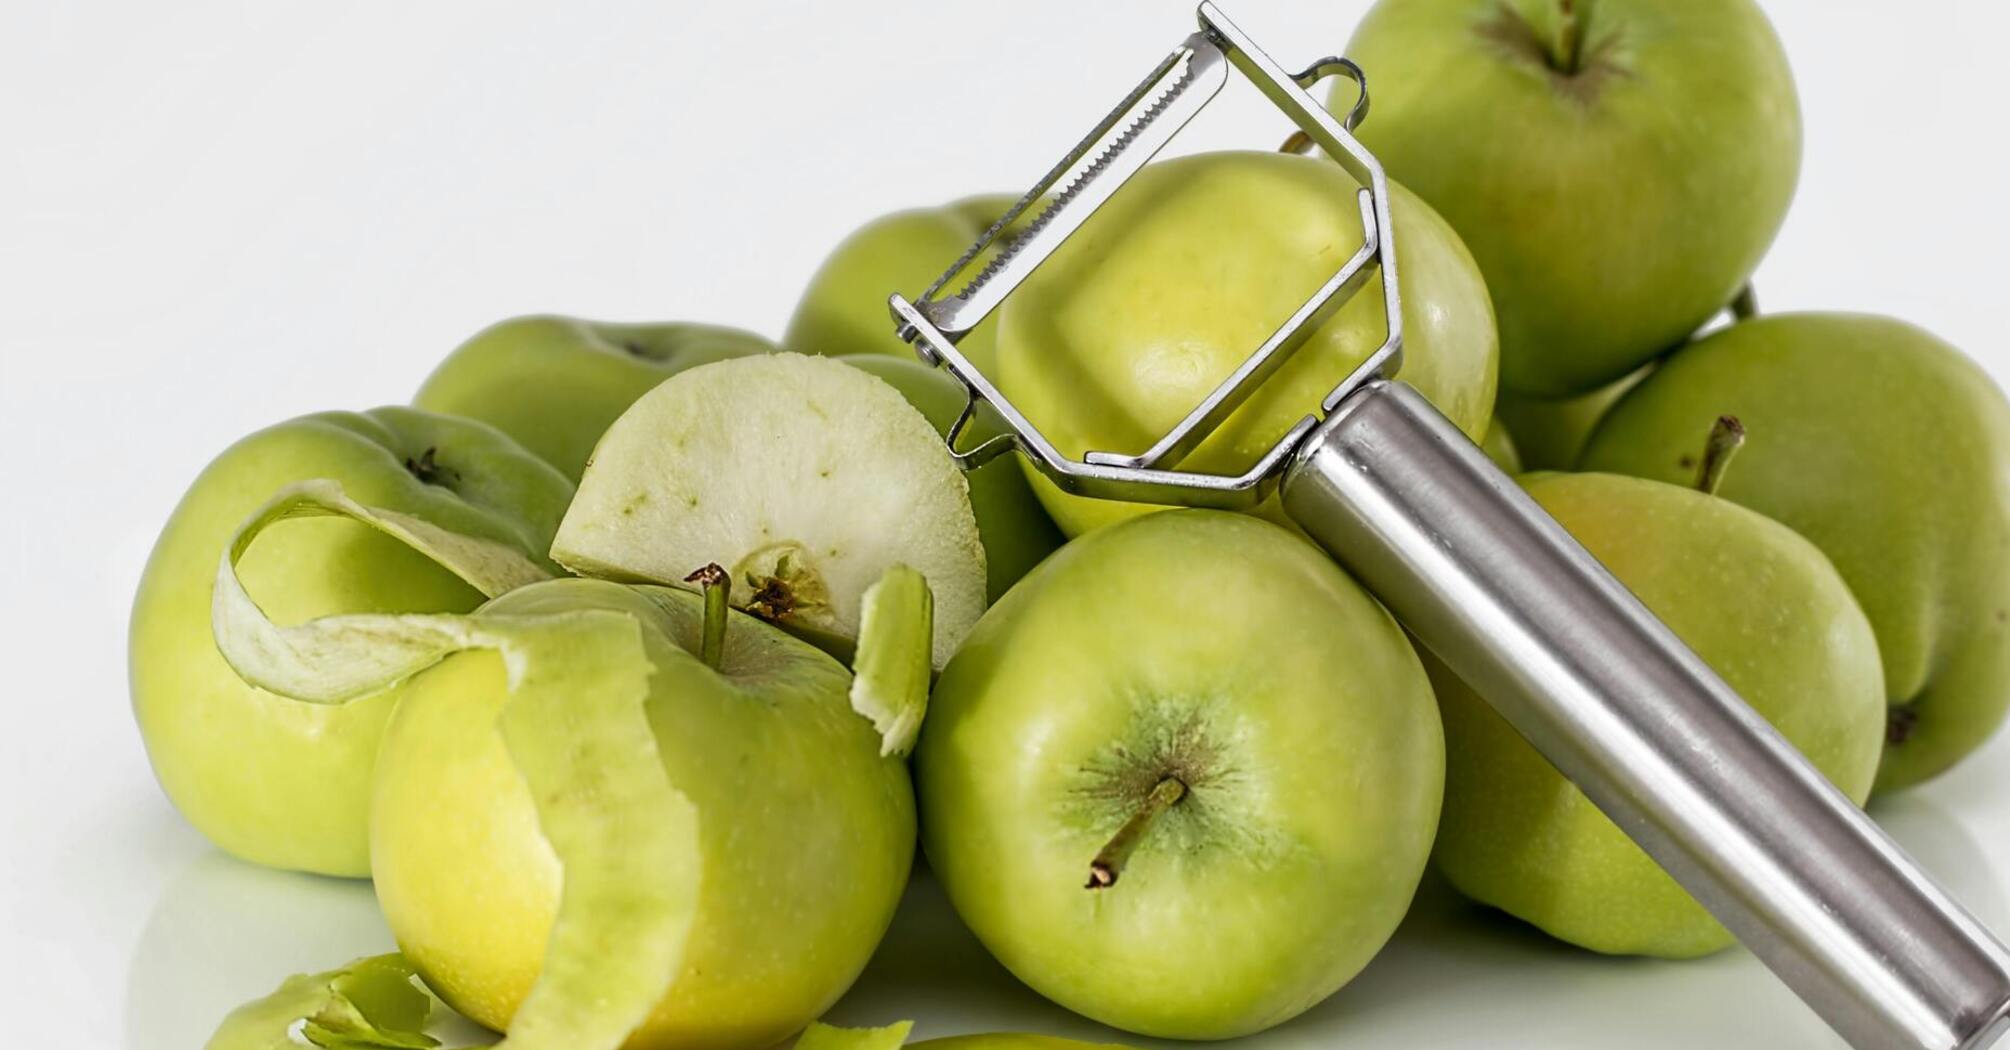 What an ordinary vegetable peeler can do: 3 interesting life hacks